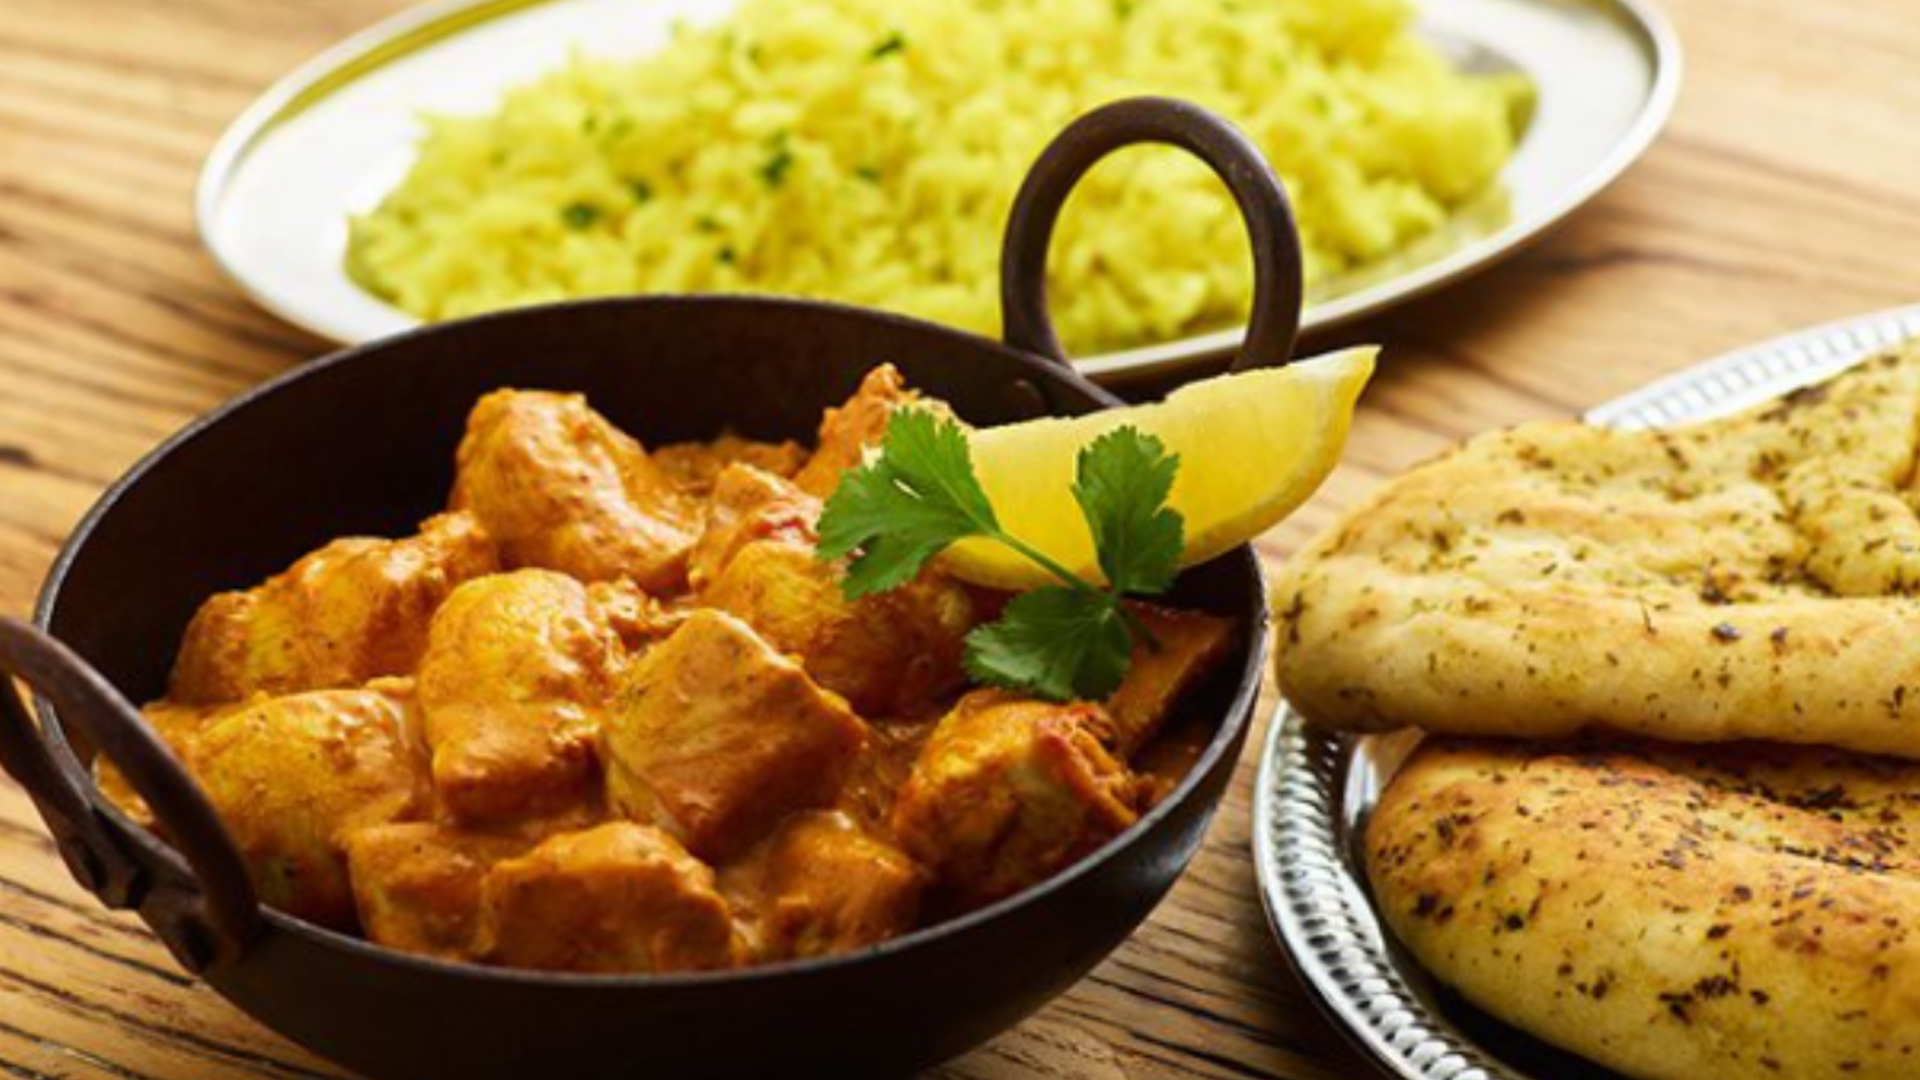 Minute by minute – here’s what an Indian takeaway curry does to your body in just one hour